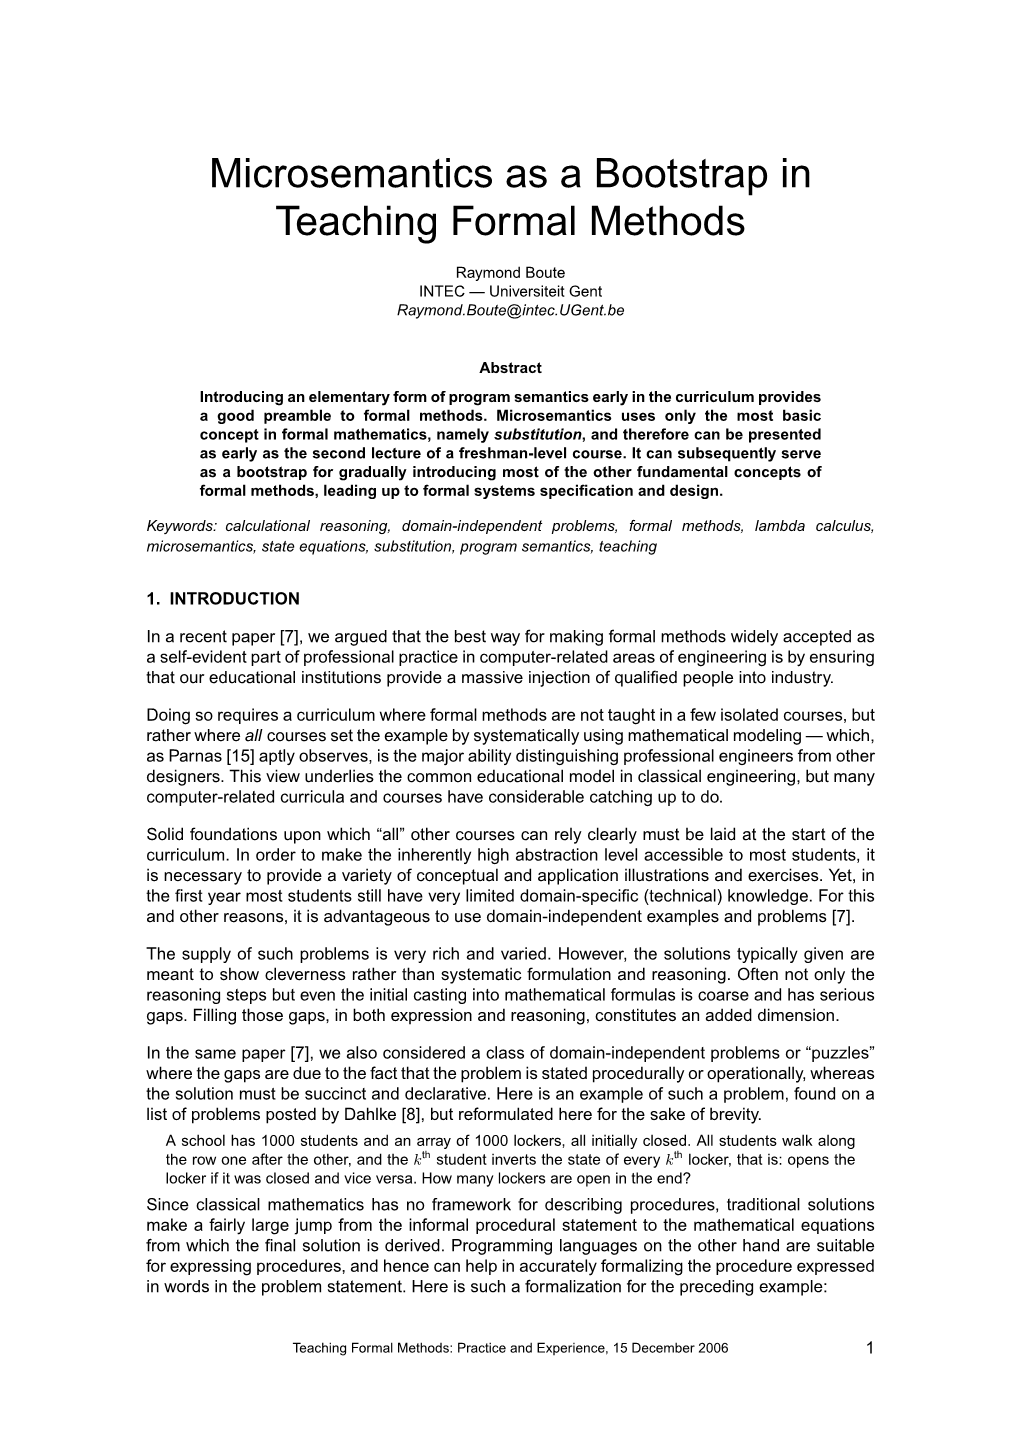 Microsemantics As a Bootstrap in Teaching Formal Methods